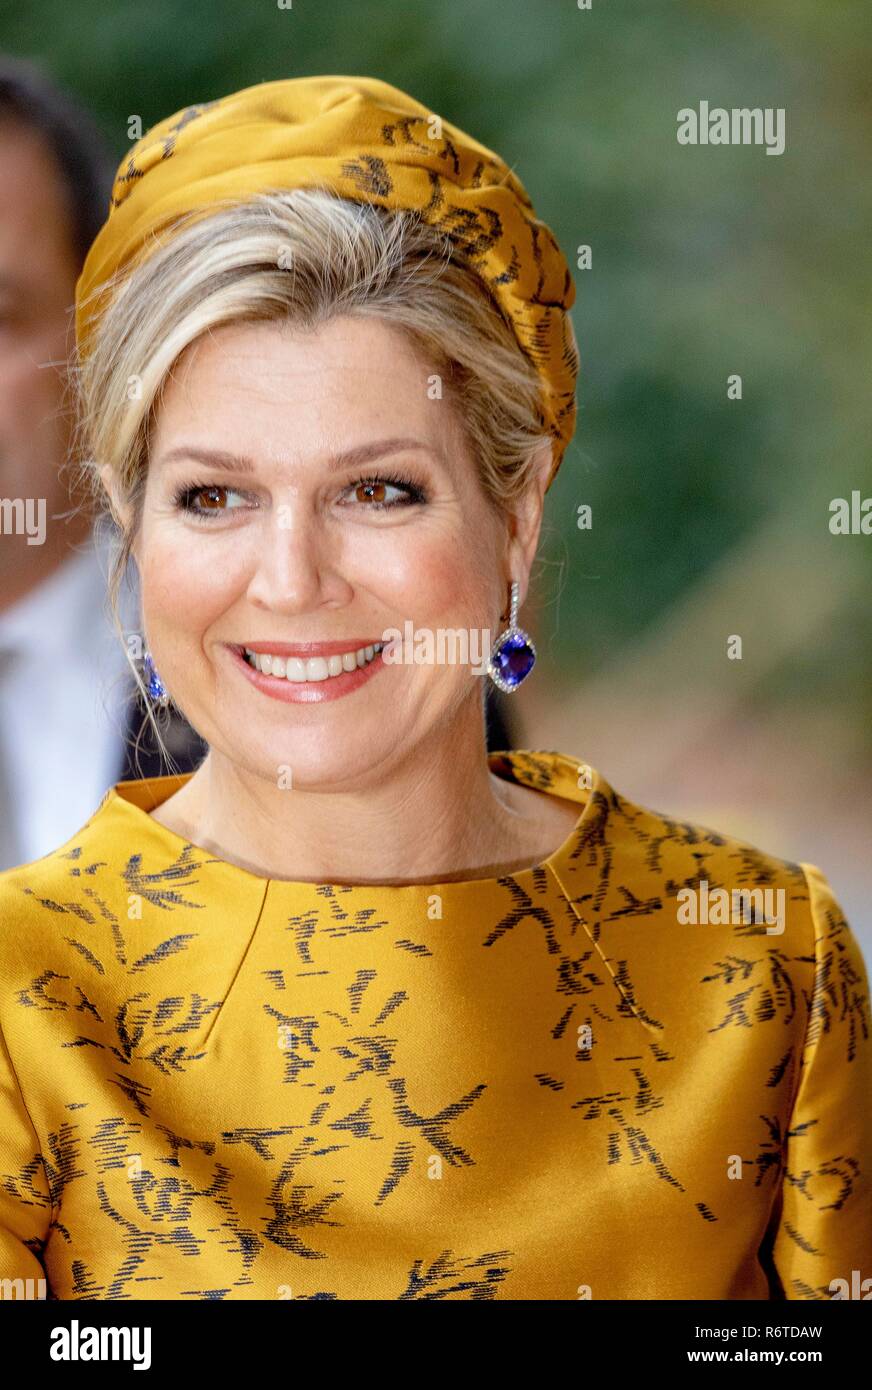 amsterdam-netherlands-06th-dec-2018-queen-maxima-of-the-netherlands-arrives-at-the-office-of-the-goede-doelen-loterijen-in-amsterdam-on-december-6-2018-to-open-the-new-sustainable-renovated-office-credit-albert-nieboer-netherlands-outpoint-de-vue-out-dpaalamy-live-news-R6TDAW.jpg